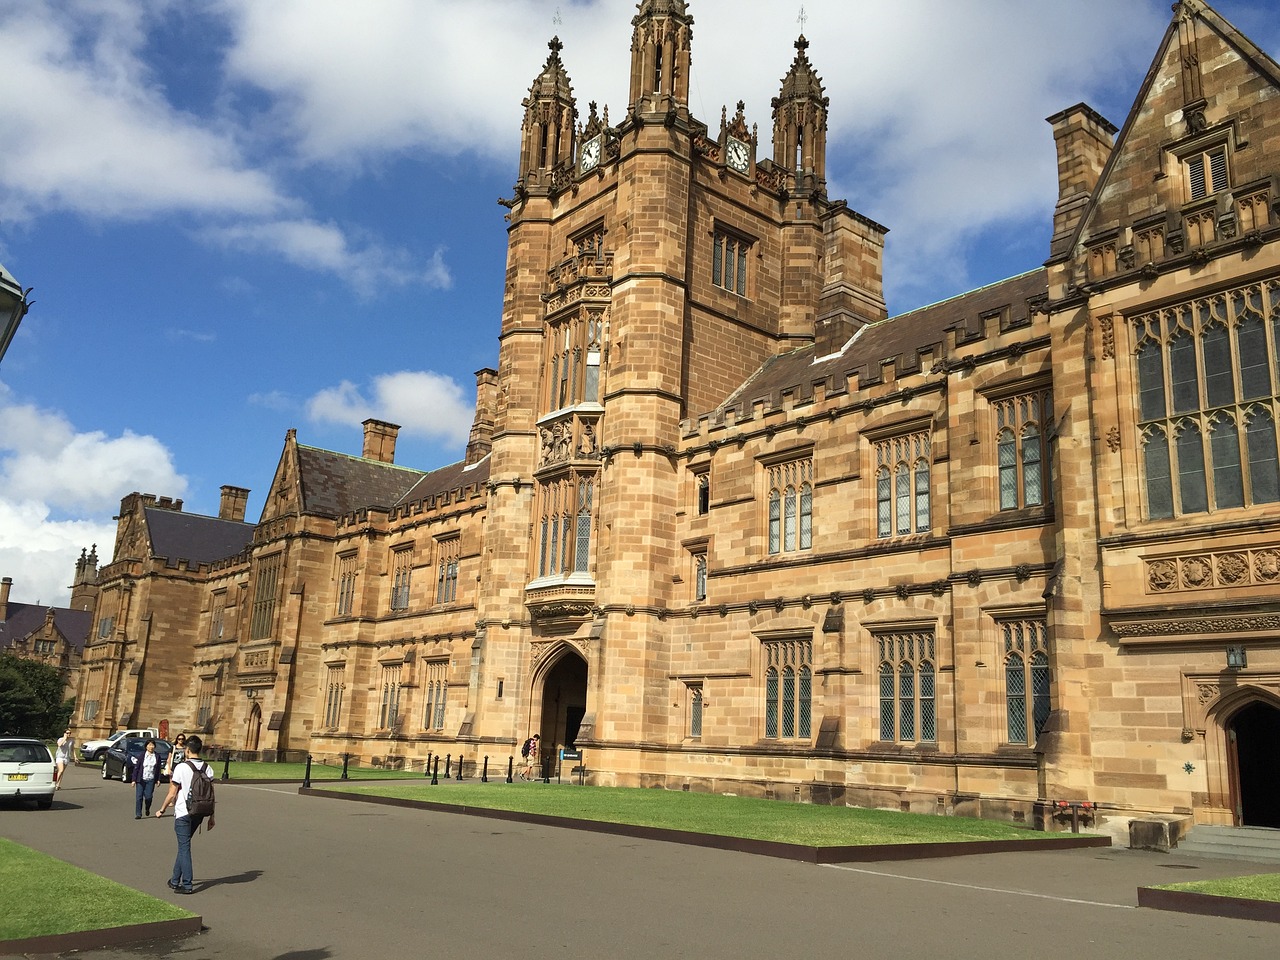 a group of people walking in front of a large building, inspired by Sydney Prior Hall, shutterstock, academic art, magic uniform university, wide angle establishing shot, shot on iphone 6, tudor architecture